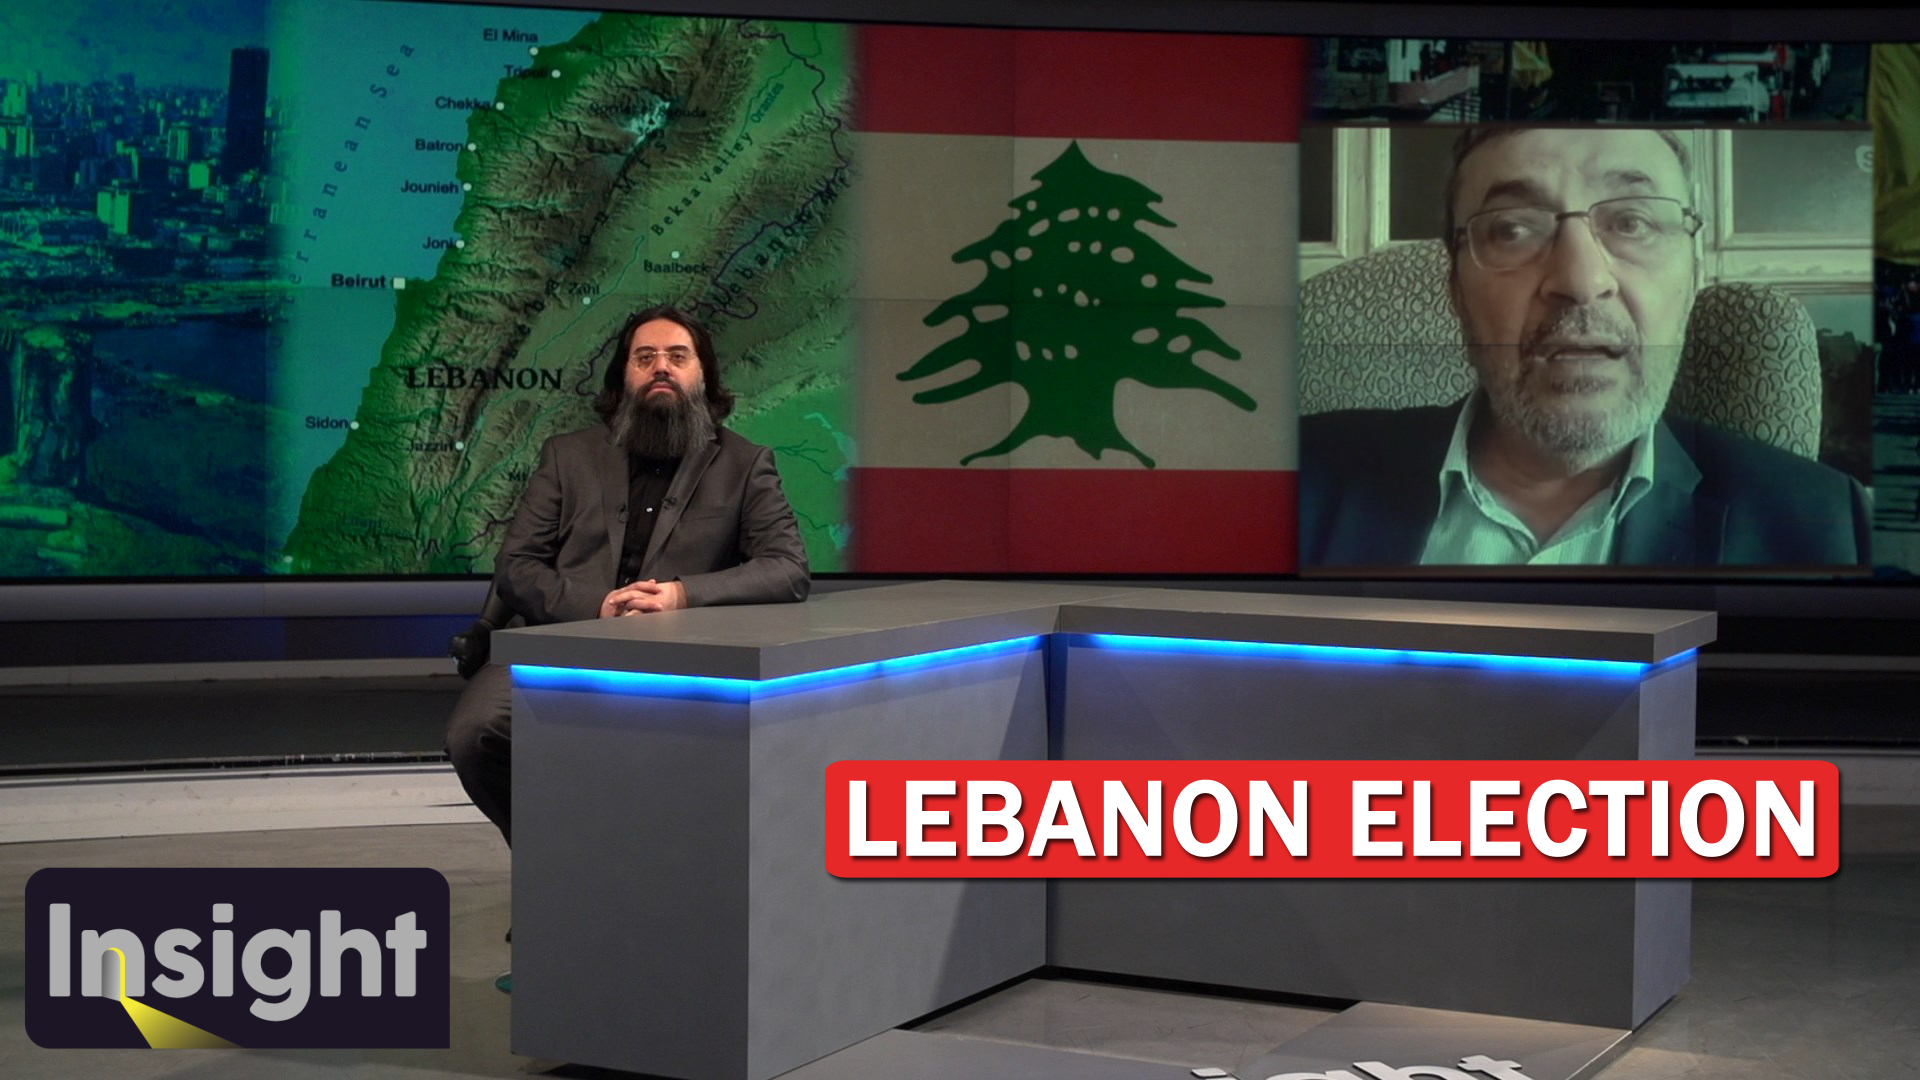 Lebanon in a state of crisis